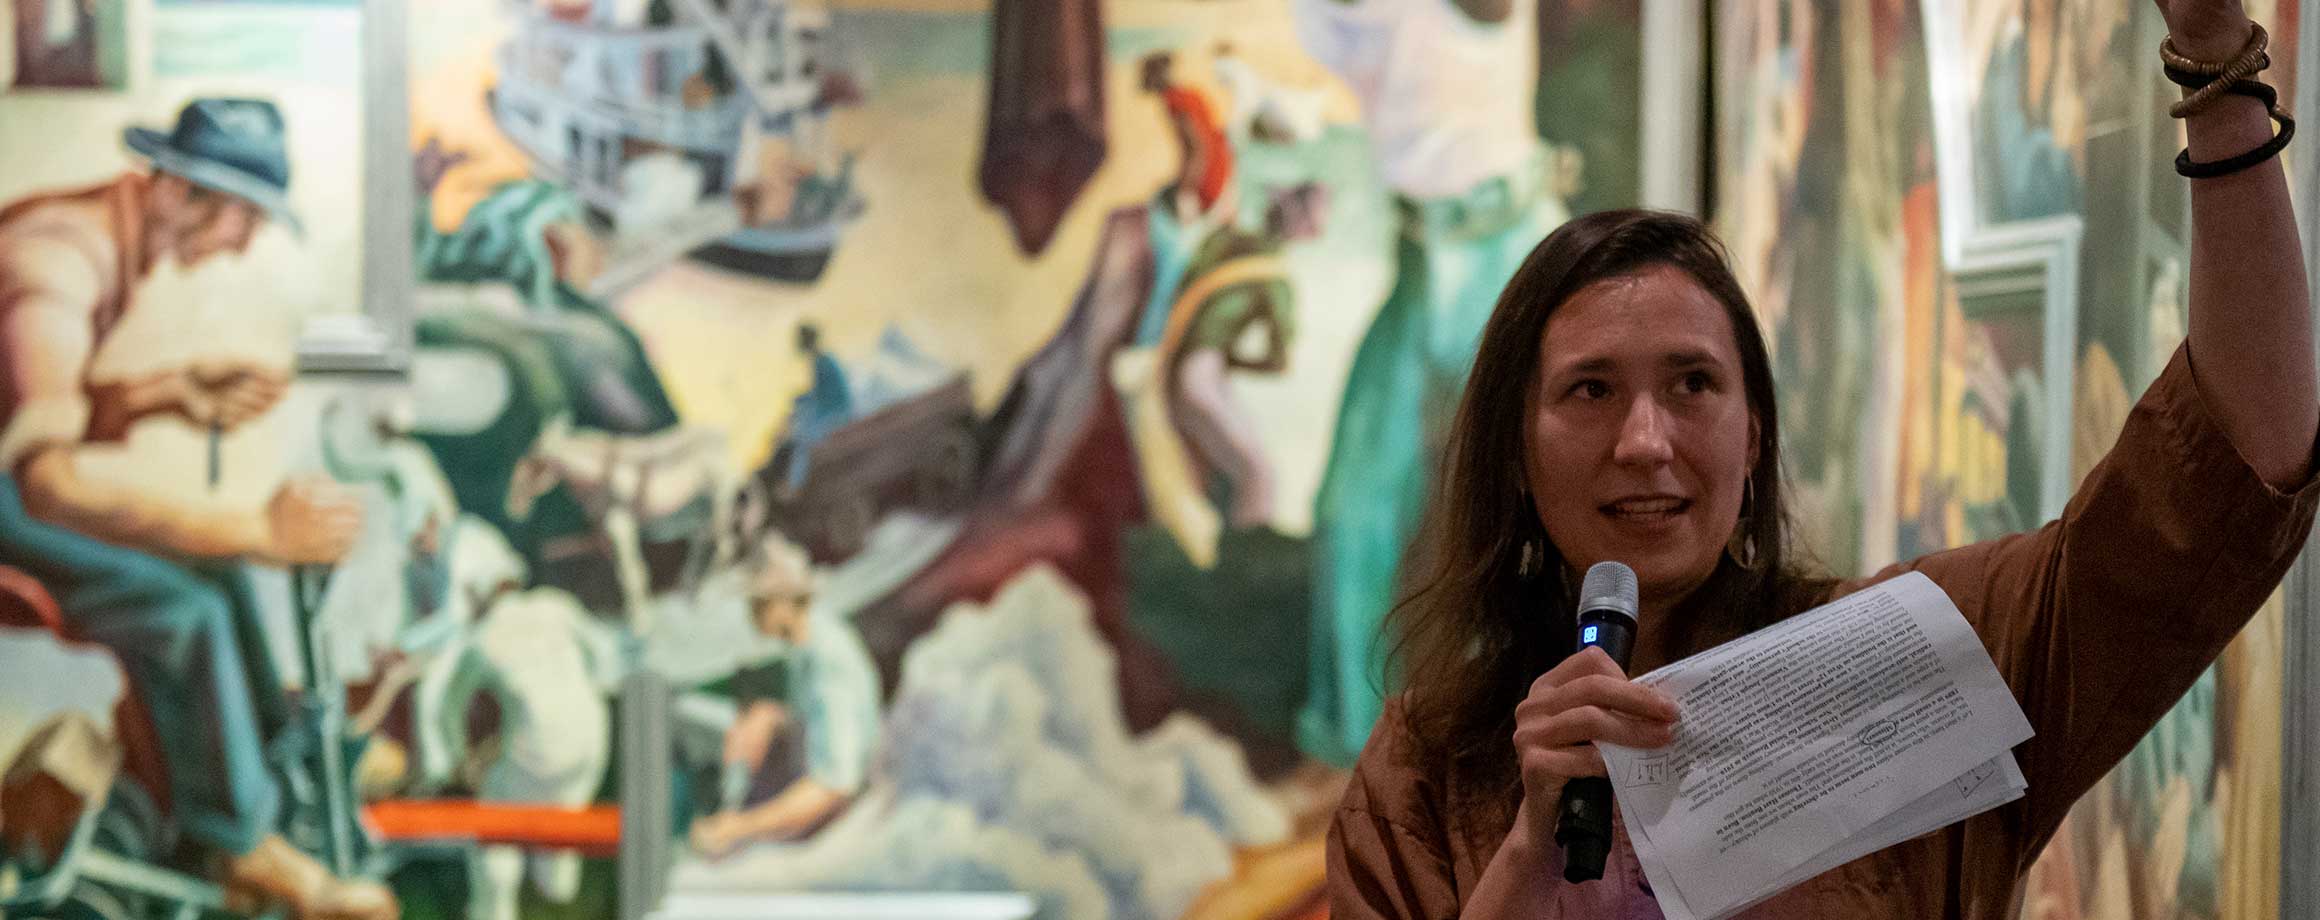 A fellow holds a mic and gives a presentation in a gallery